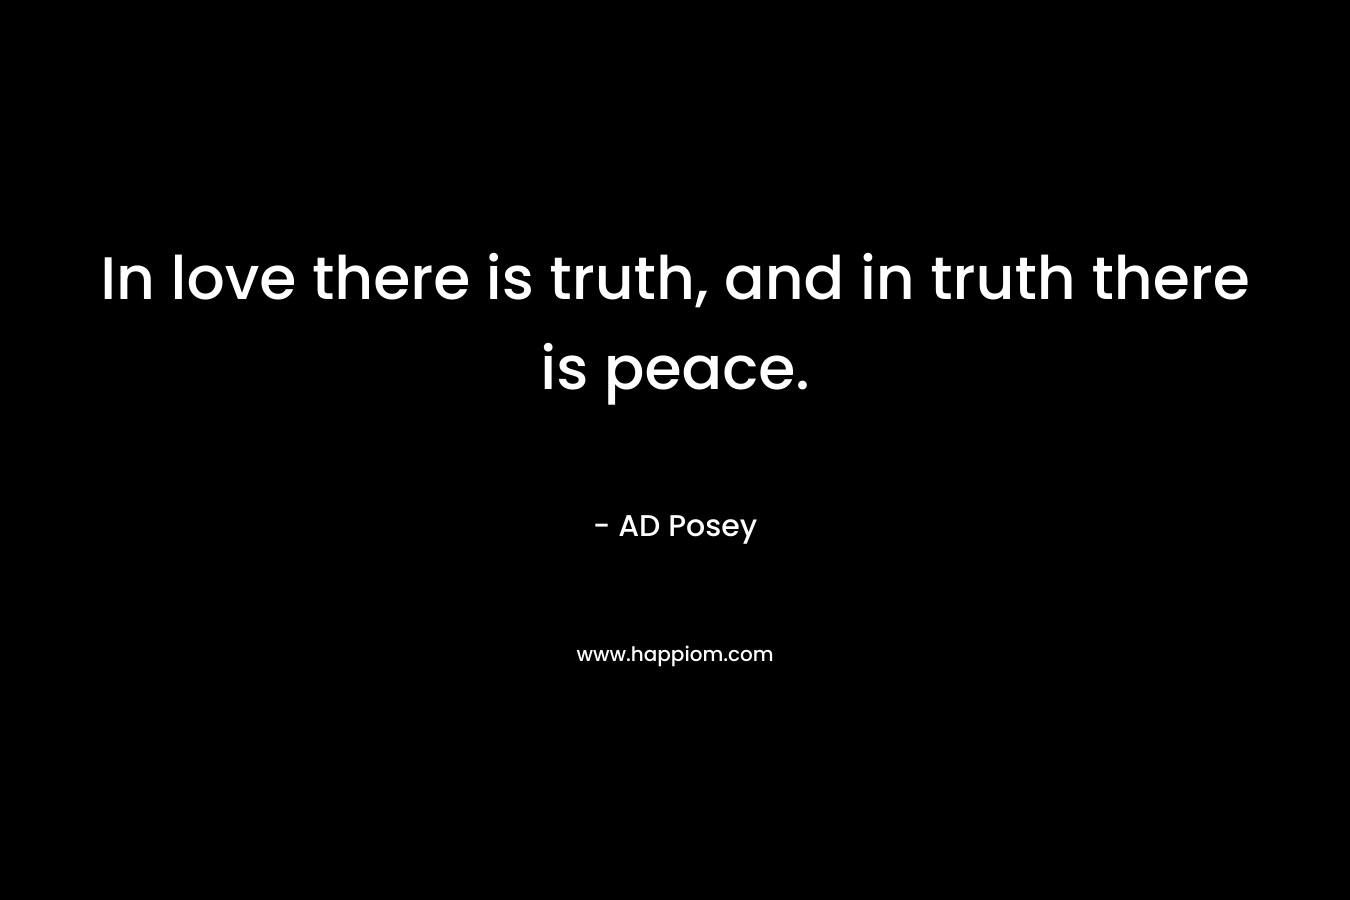 In love there is truth, and in truth there is peace.